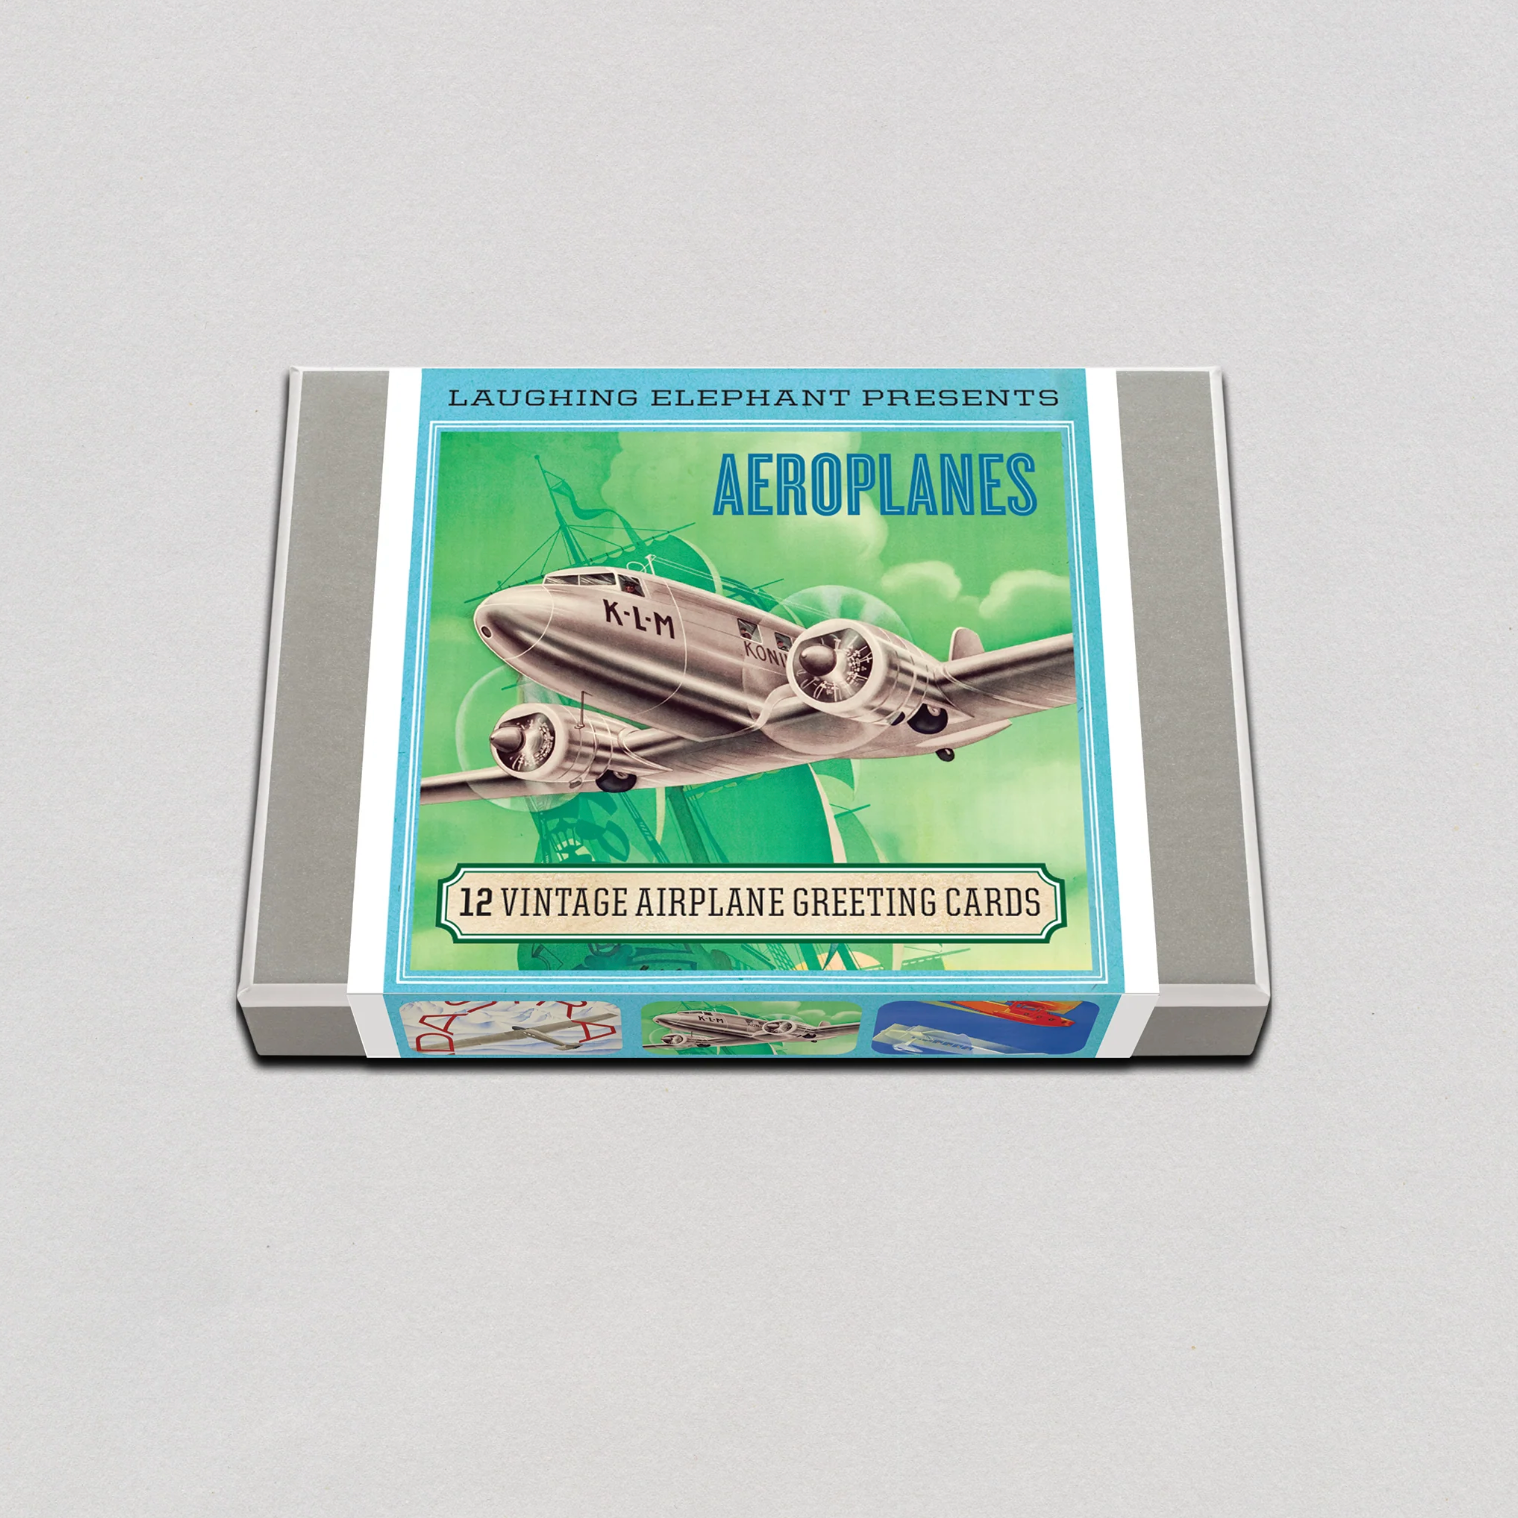 A photo of Laughing Elephant's Aeroplanes Boxed Greeting Cards with a vintage airplane on the cover